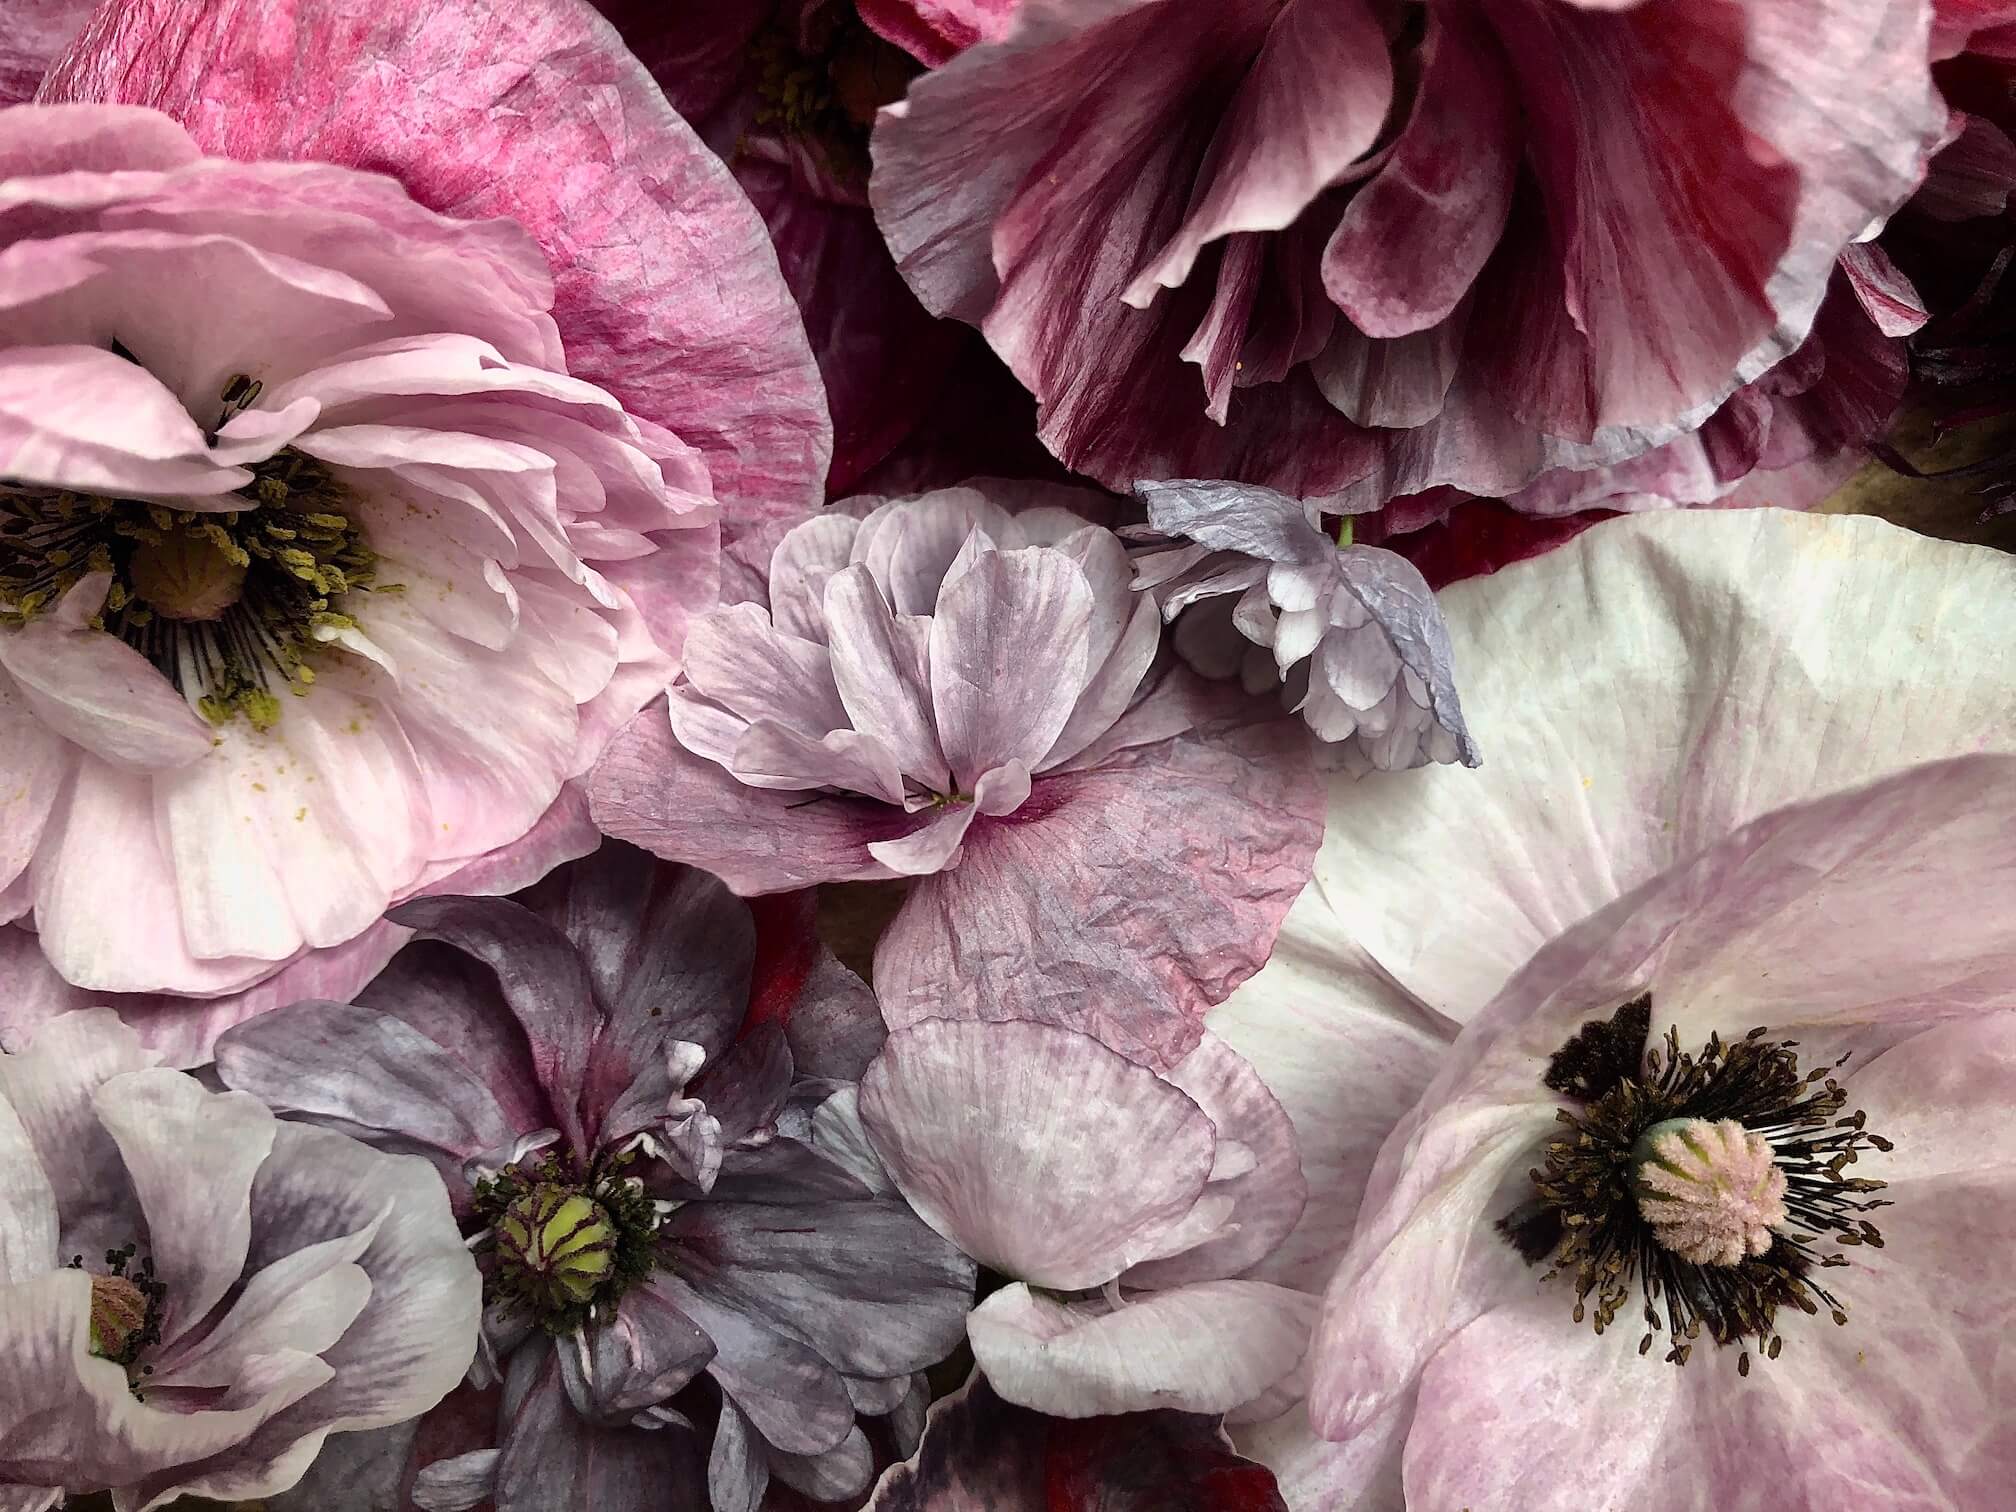 pandora poppies close up in pinks whites and silvers